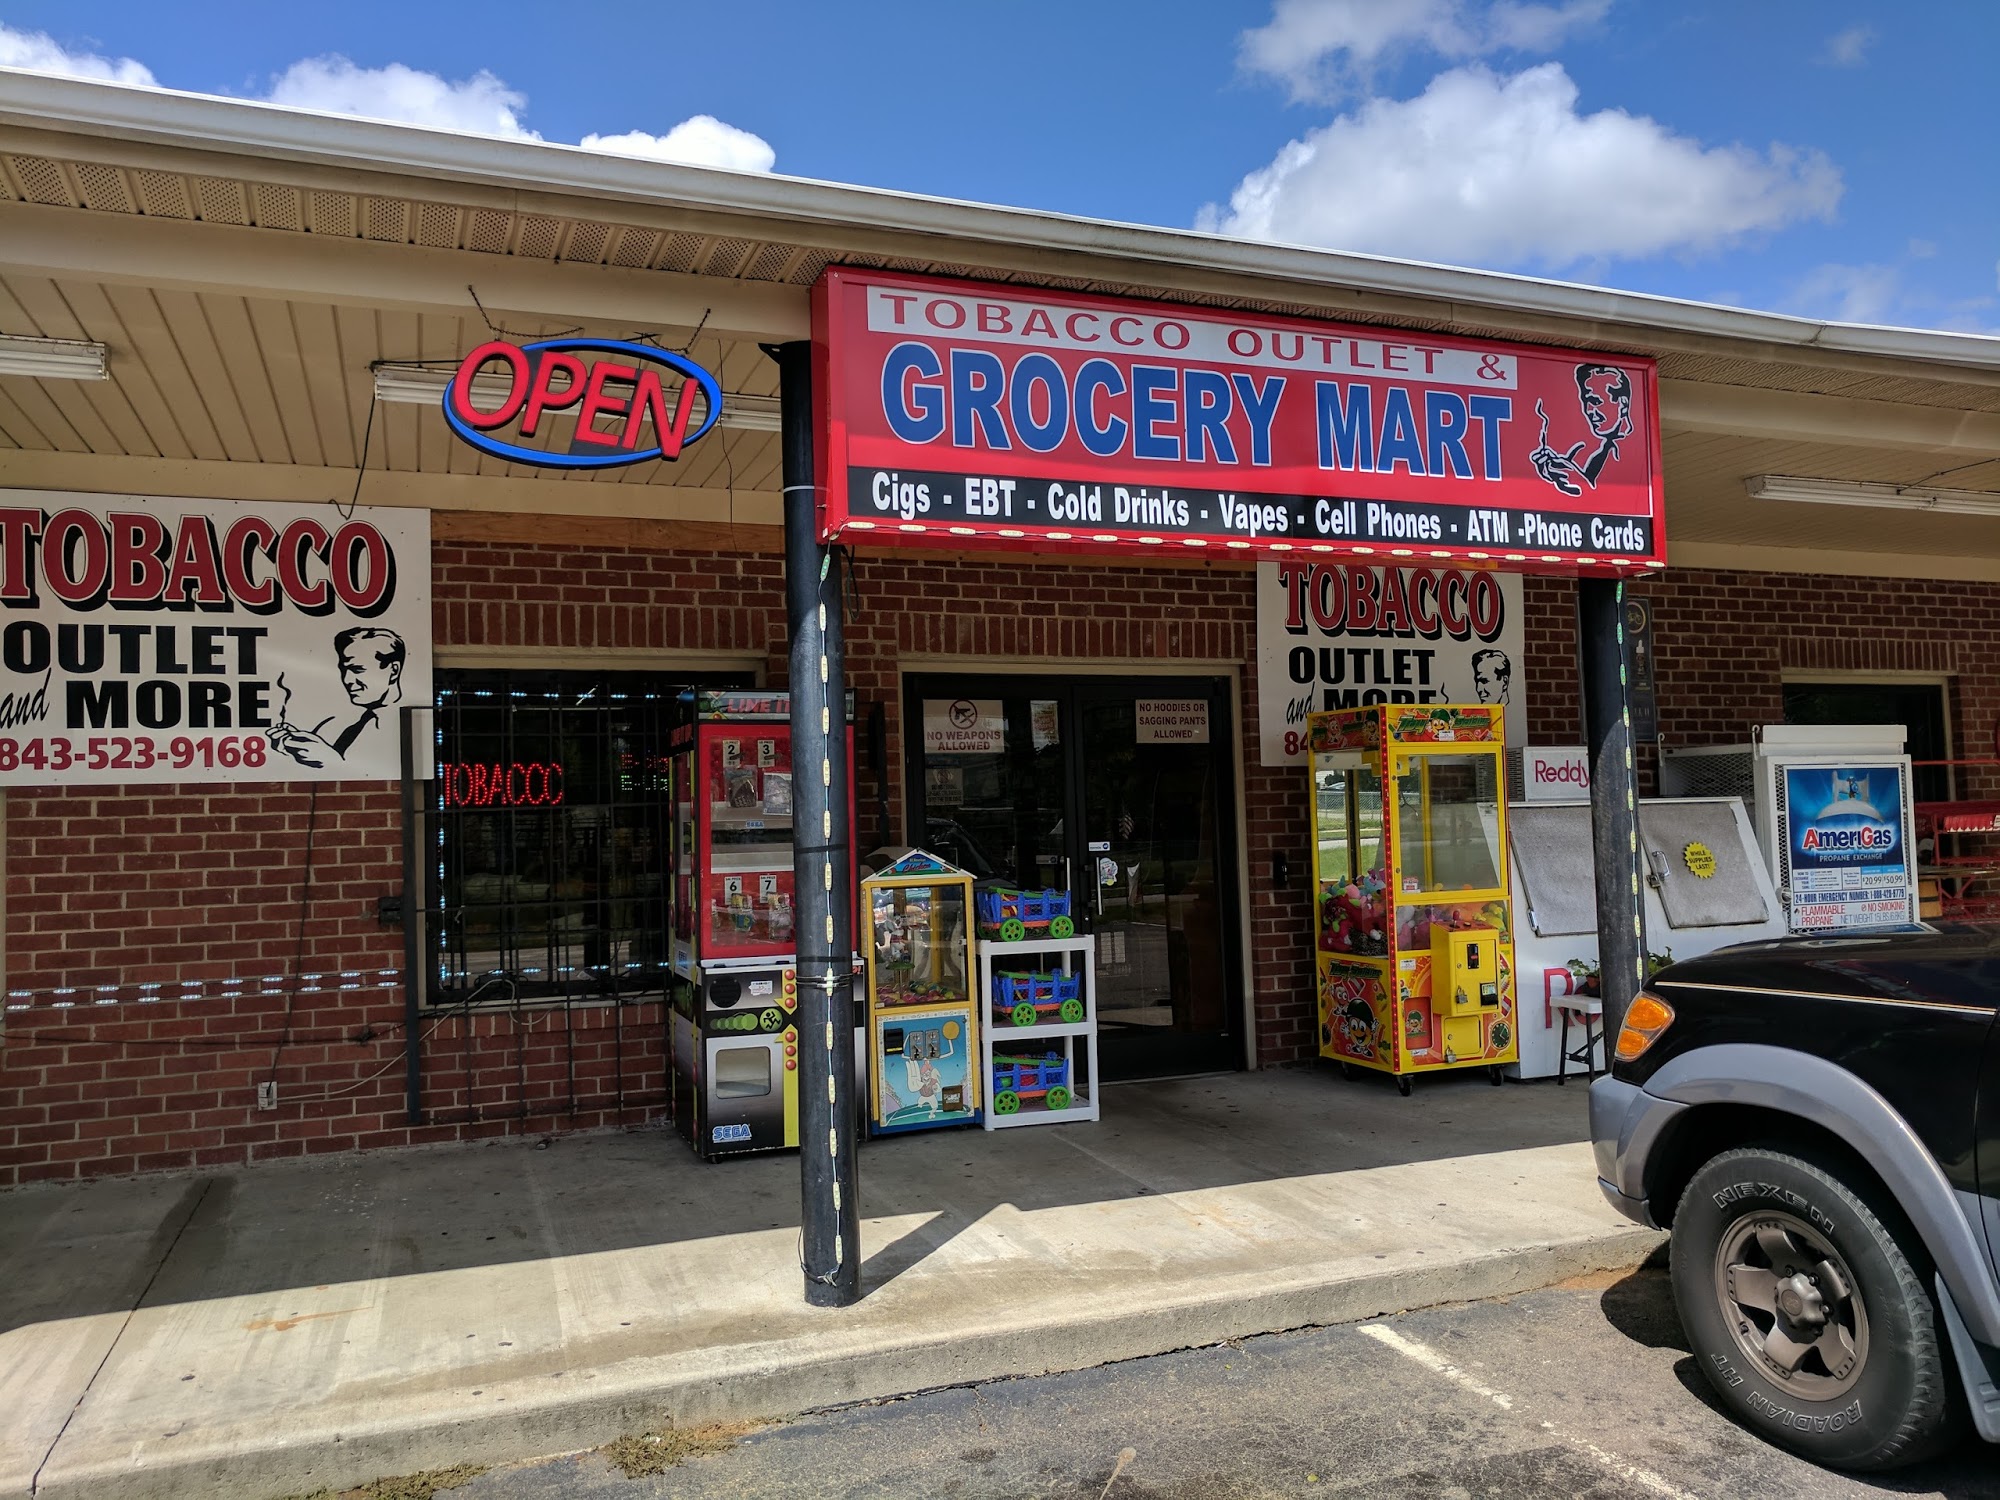 Tobacco Outlet & Grocery Mart